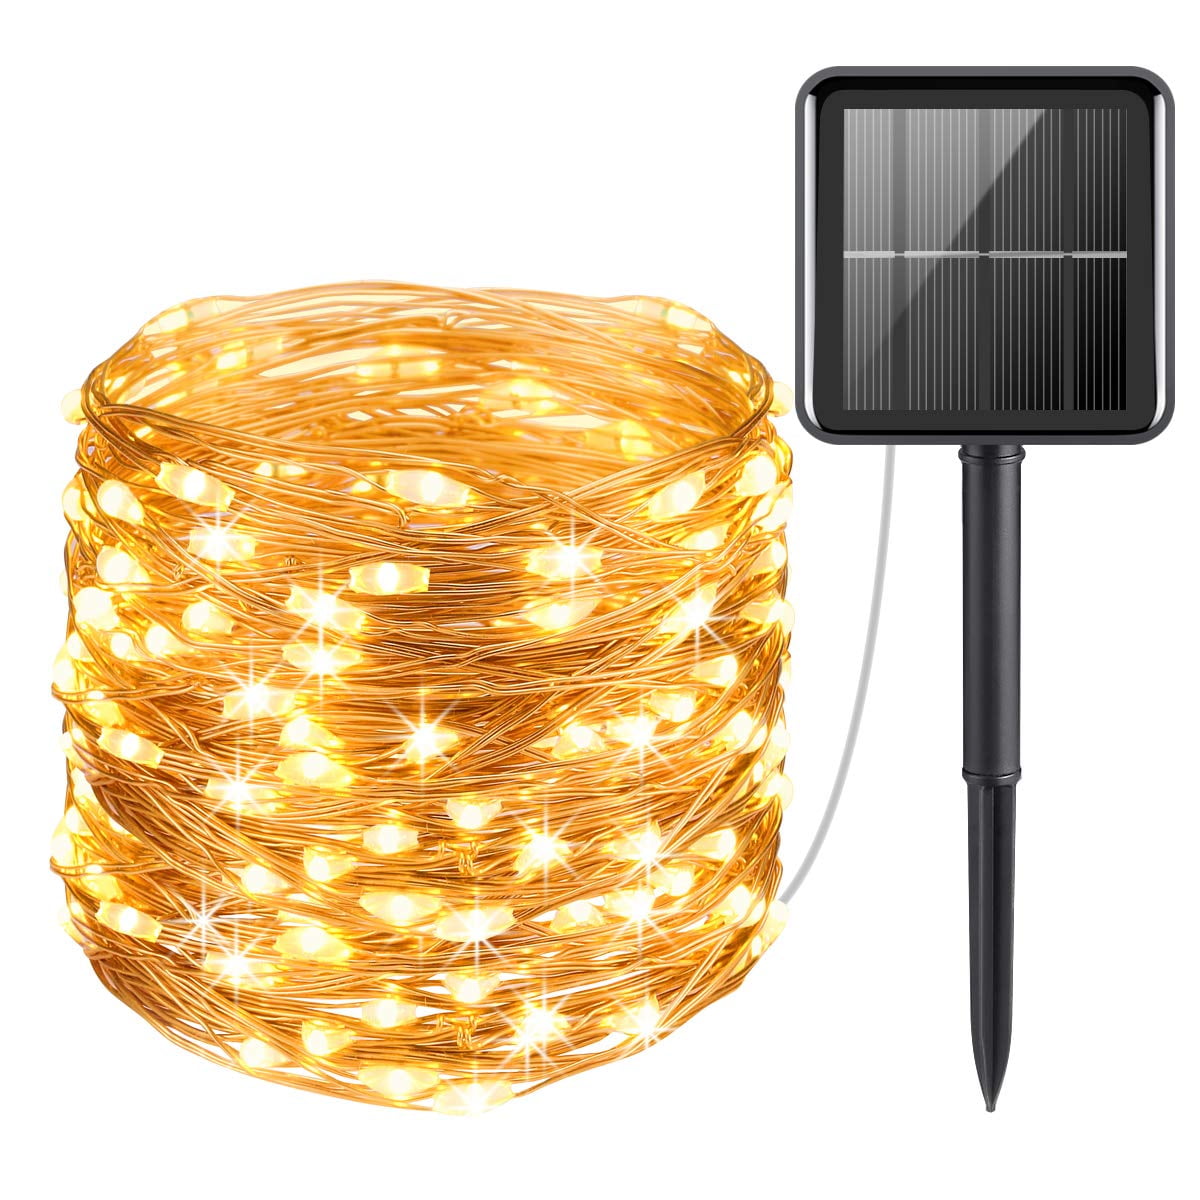 LED Solar String Lights Waterproof Copper Wire Lamp 8 Mode Decorative Light 